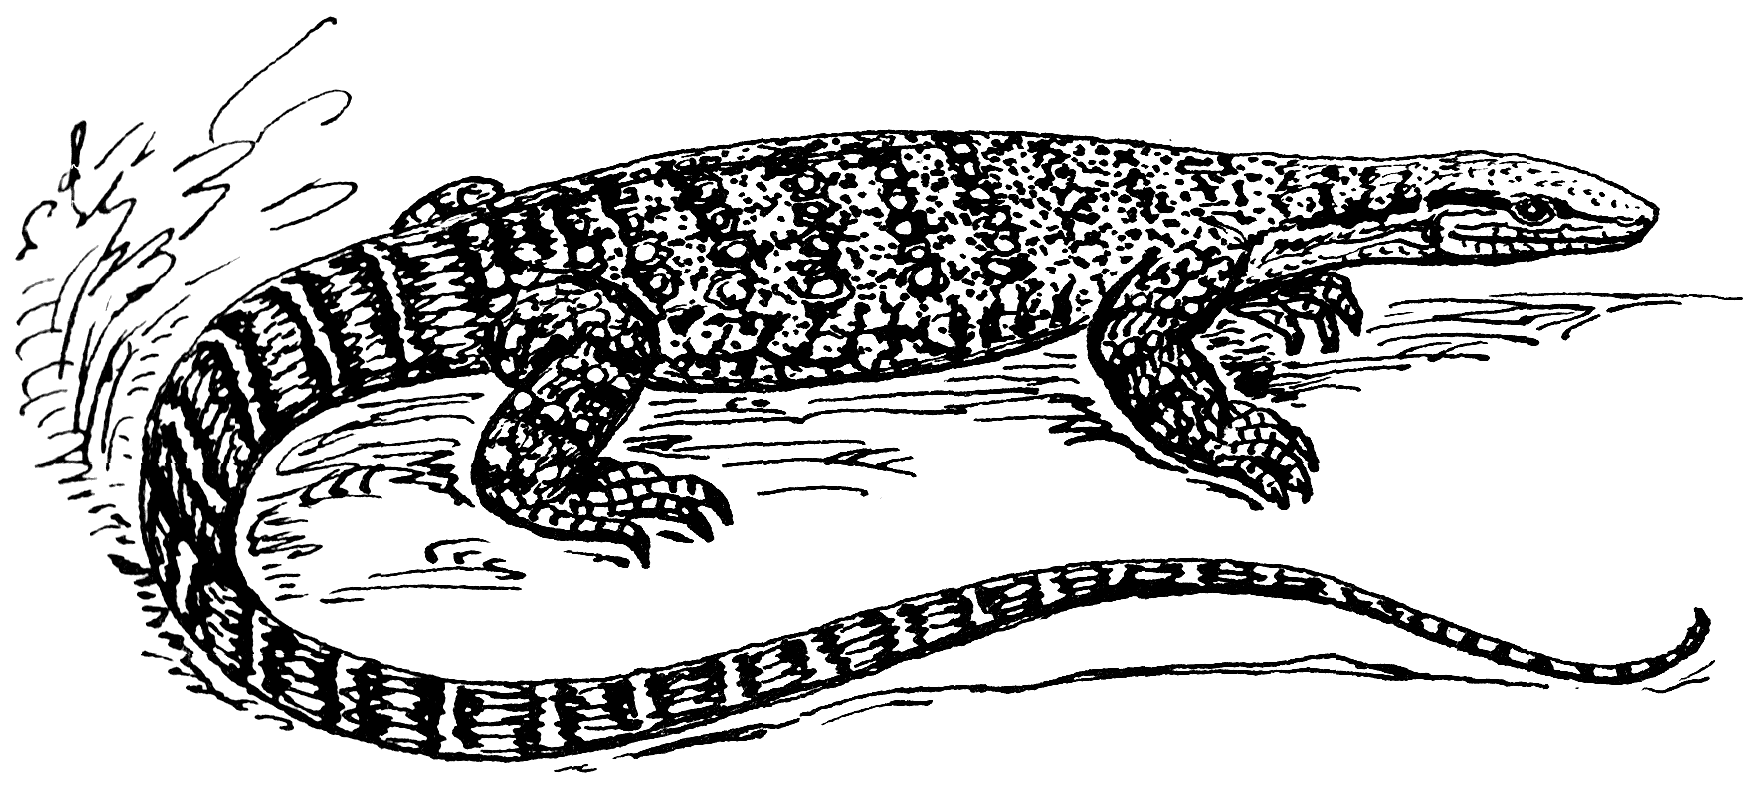 Image description: line drawing of a monitor lizard